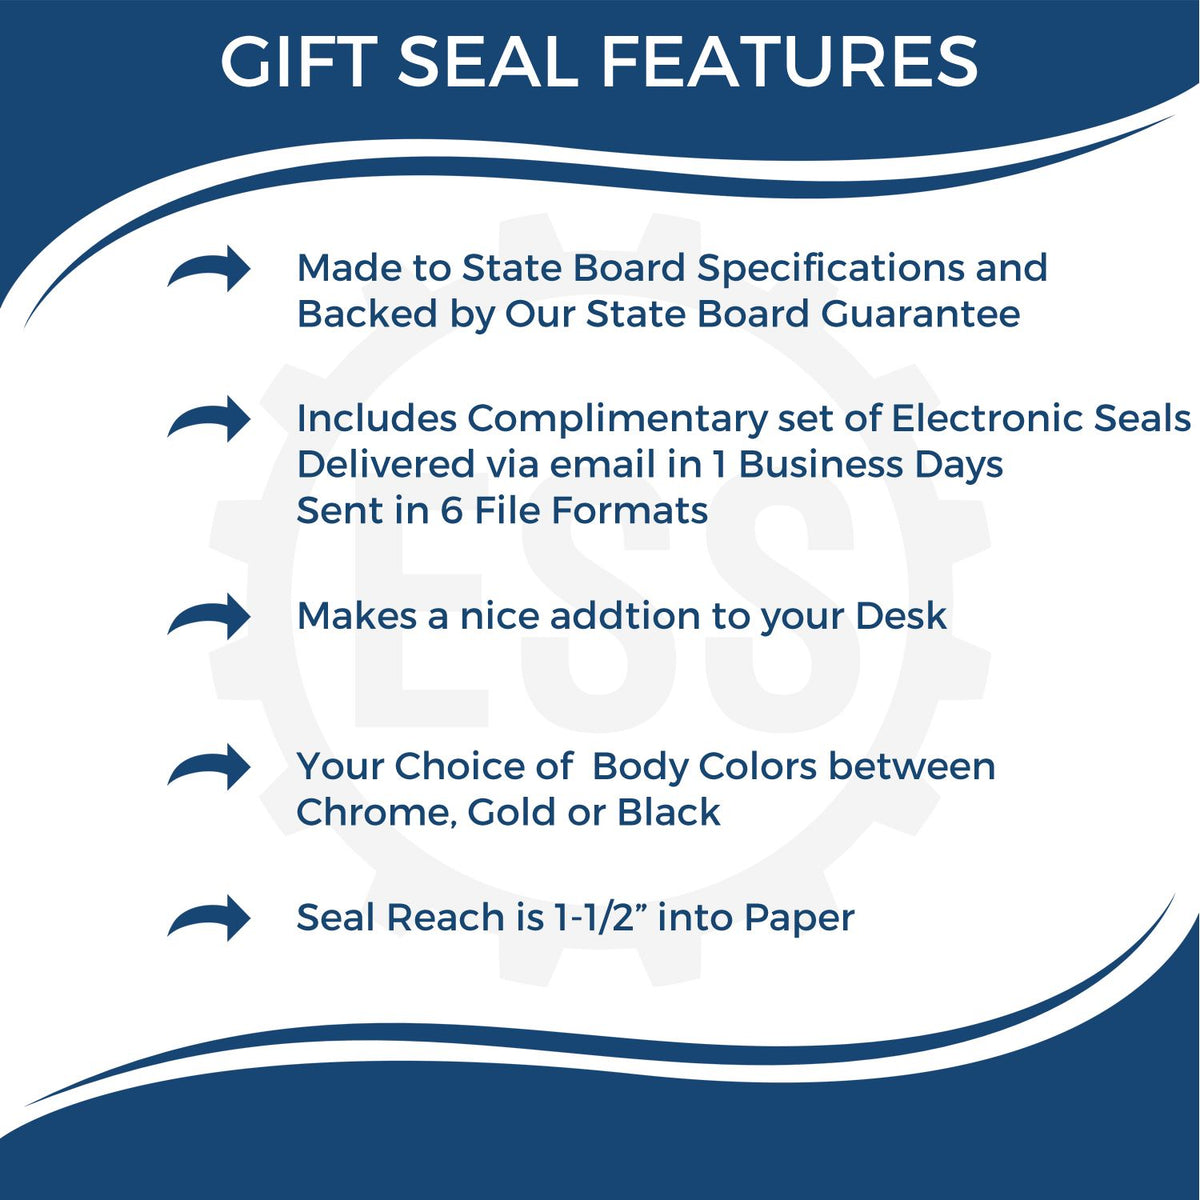 A picture of an infographic highlighting the selling points for the Gift Connecticut Geologist Seal